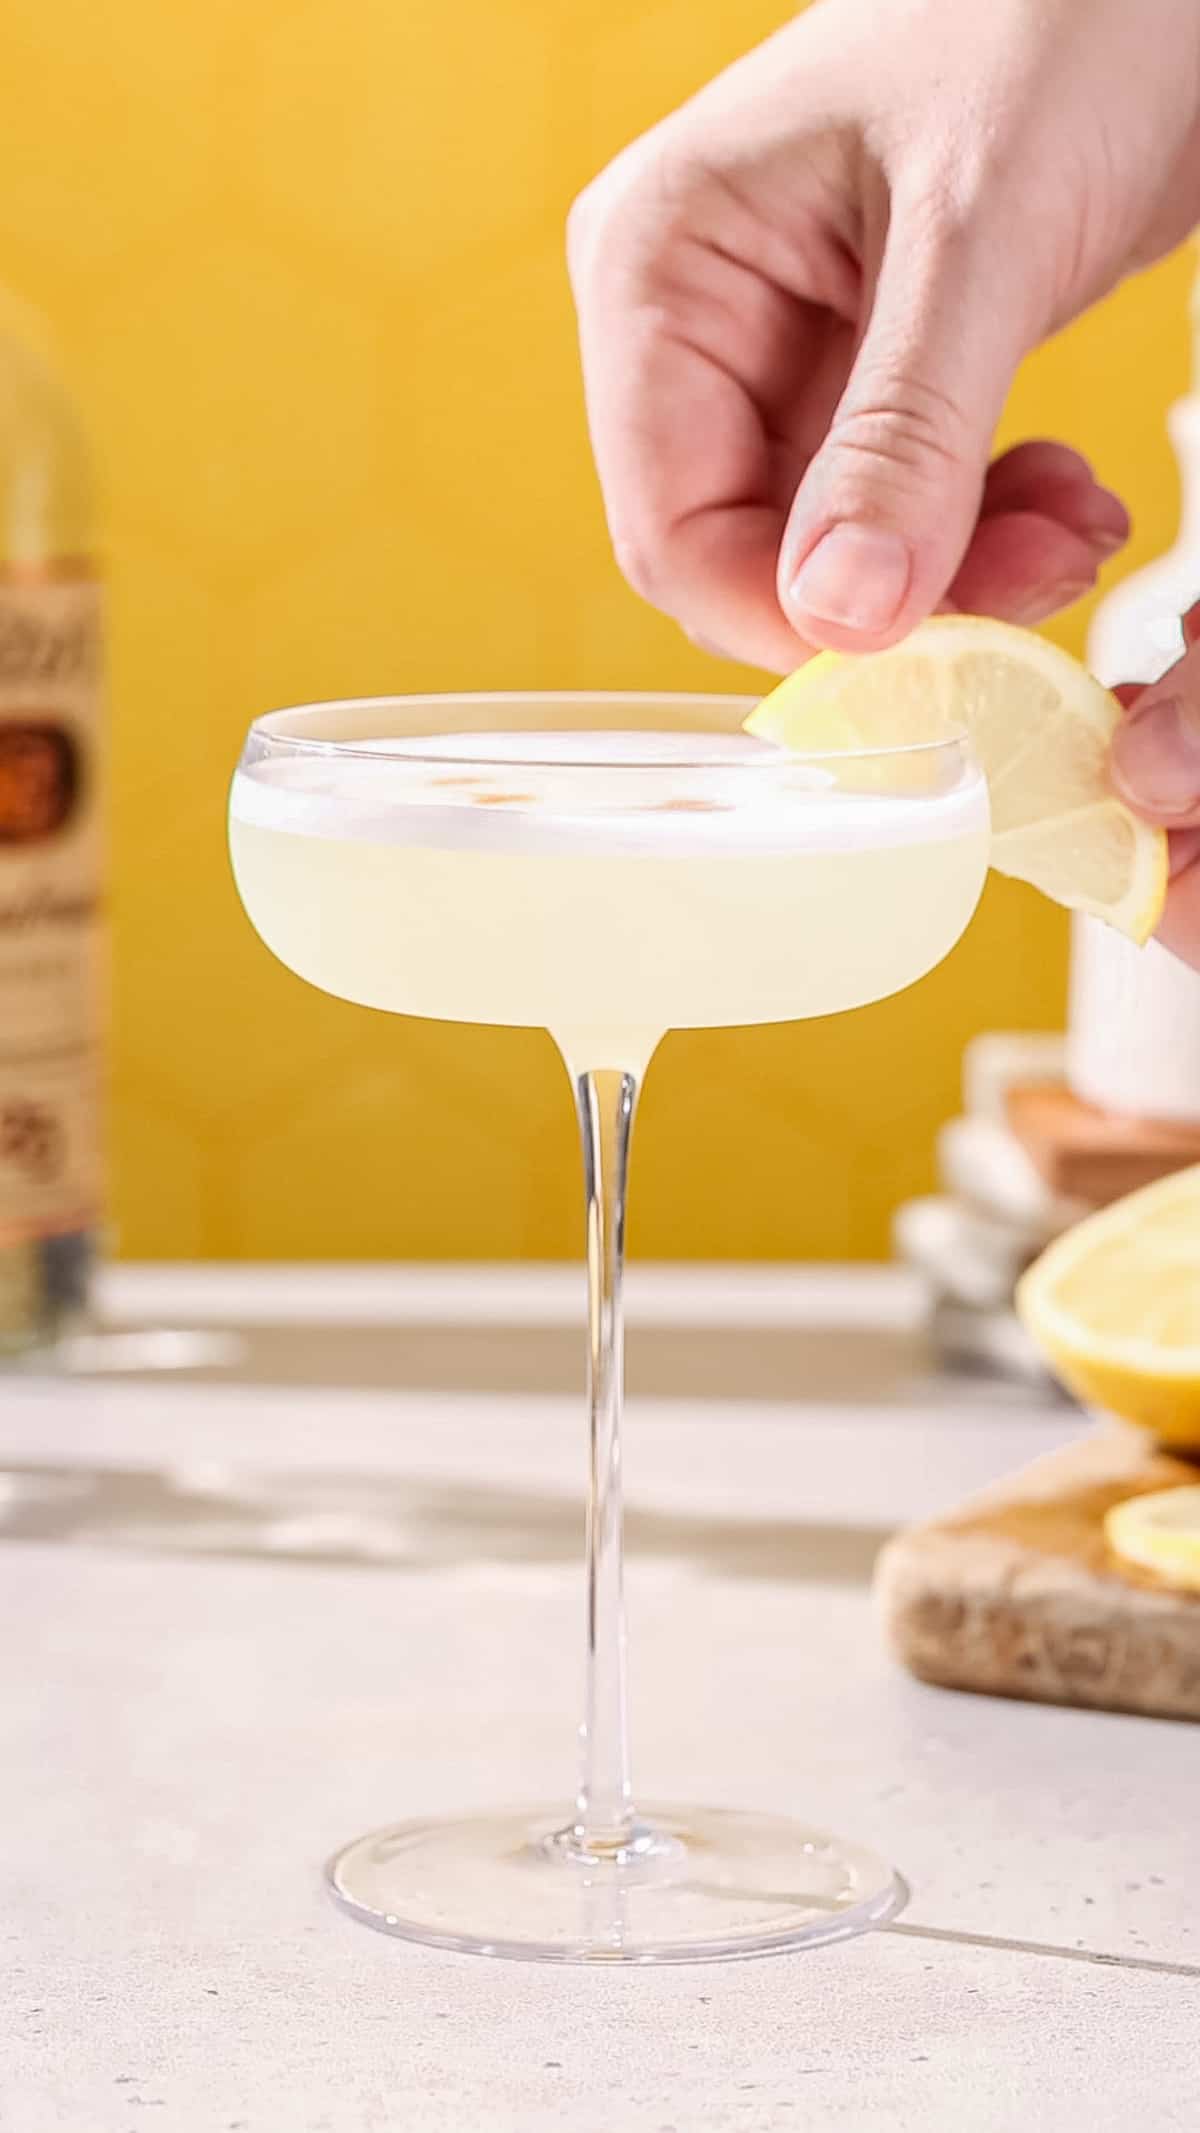 Hand adding a lemon slice to garnish a cocktail in a coupe glass.